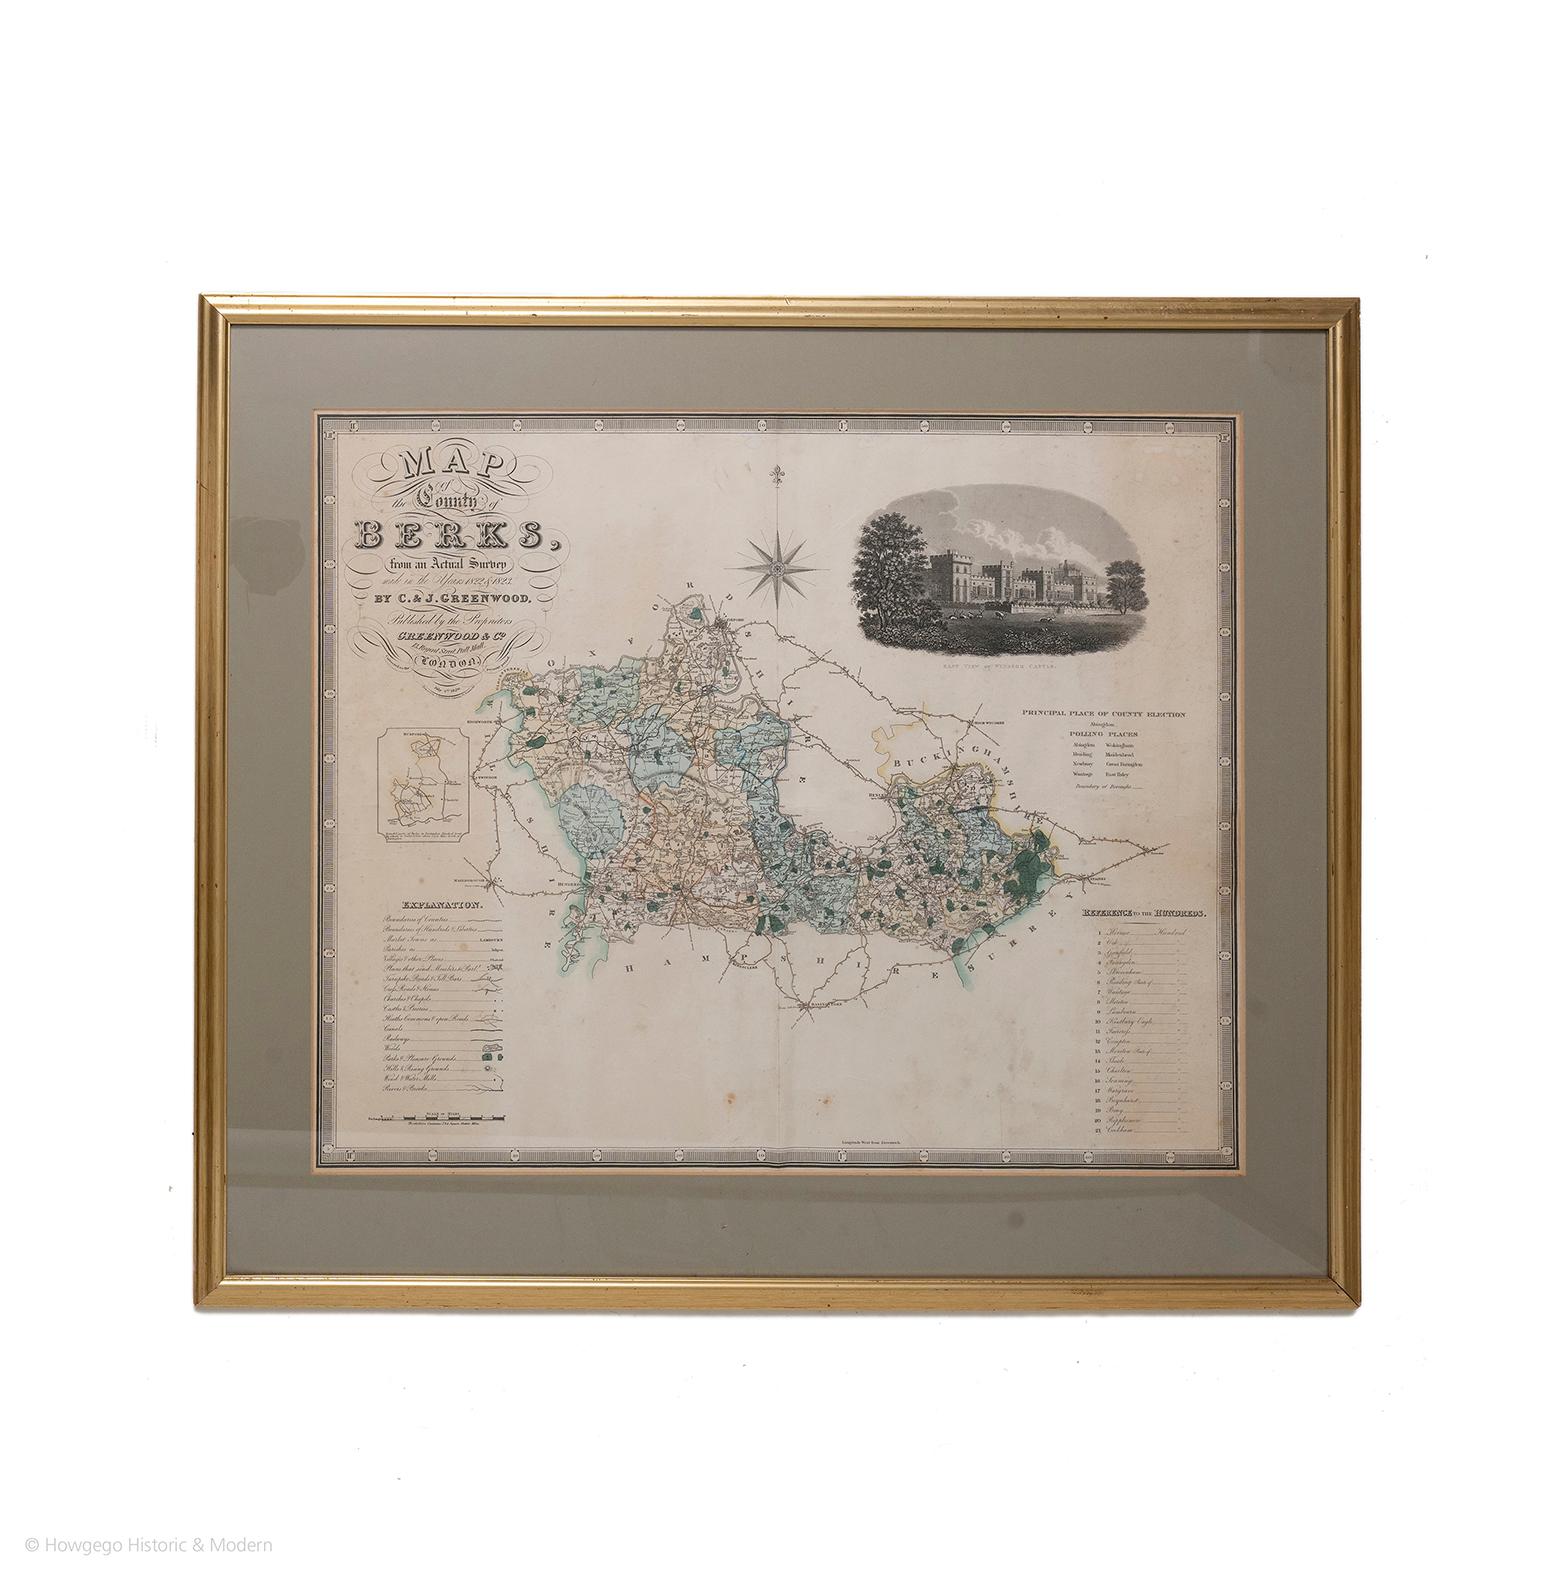 Map of the County of Berkshire from an Actual Survey made in the Years 1822 & 1823 by C&J Greenwood 
Published by the Proprietors Greenwood & Co 13 Regent Street Pall Mall London July 4th 1829

A large colored map of Berkshire: with a black &